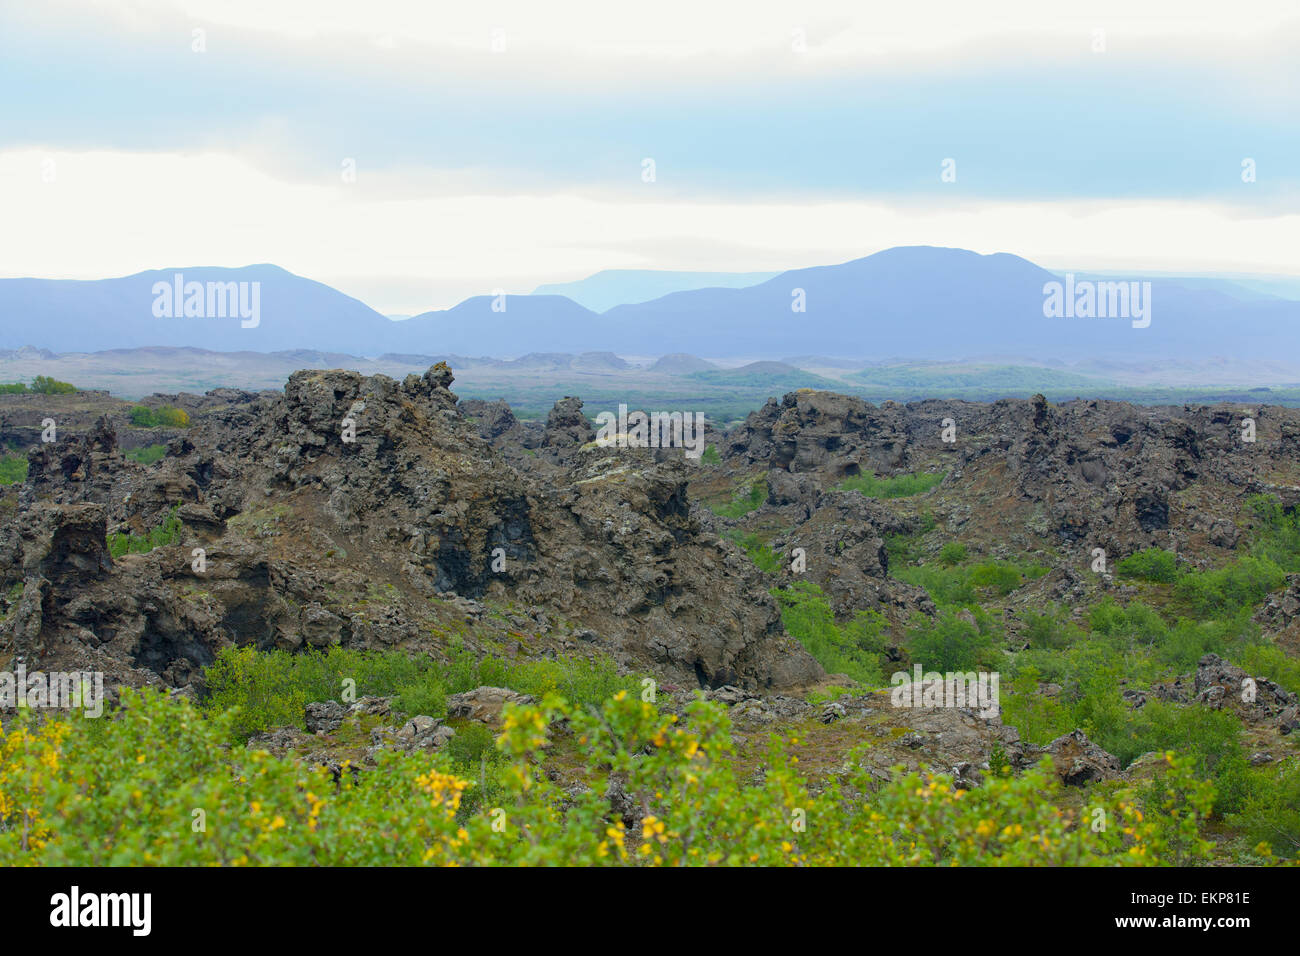 The Dimmuborgir area is composed of various volcanic caves and rock formations, Iceland. Stock Photo